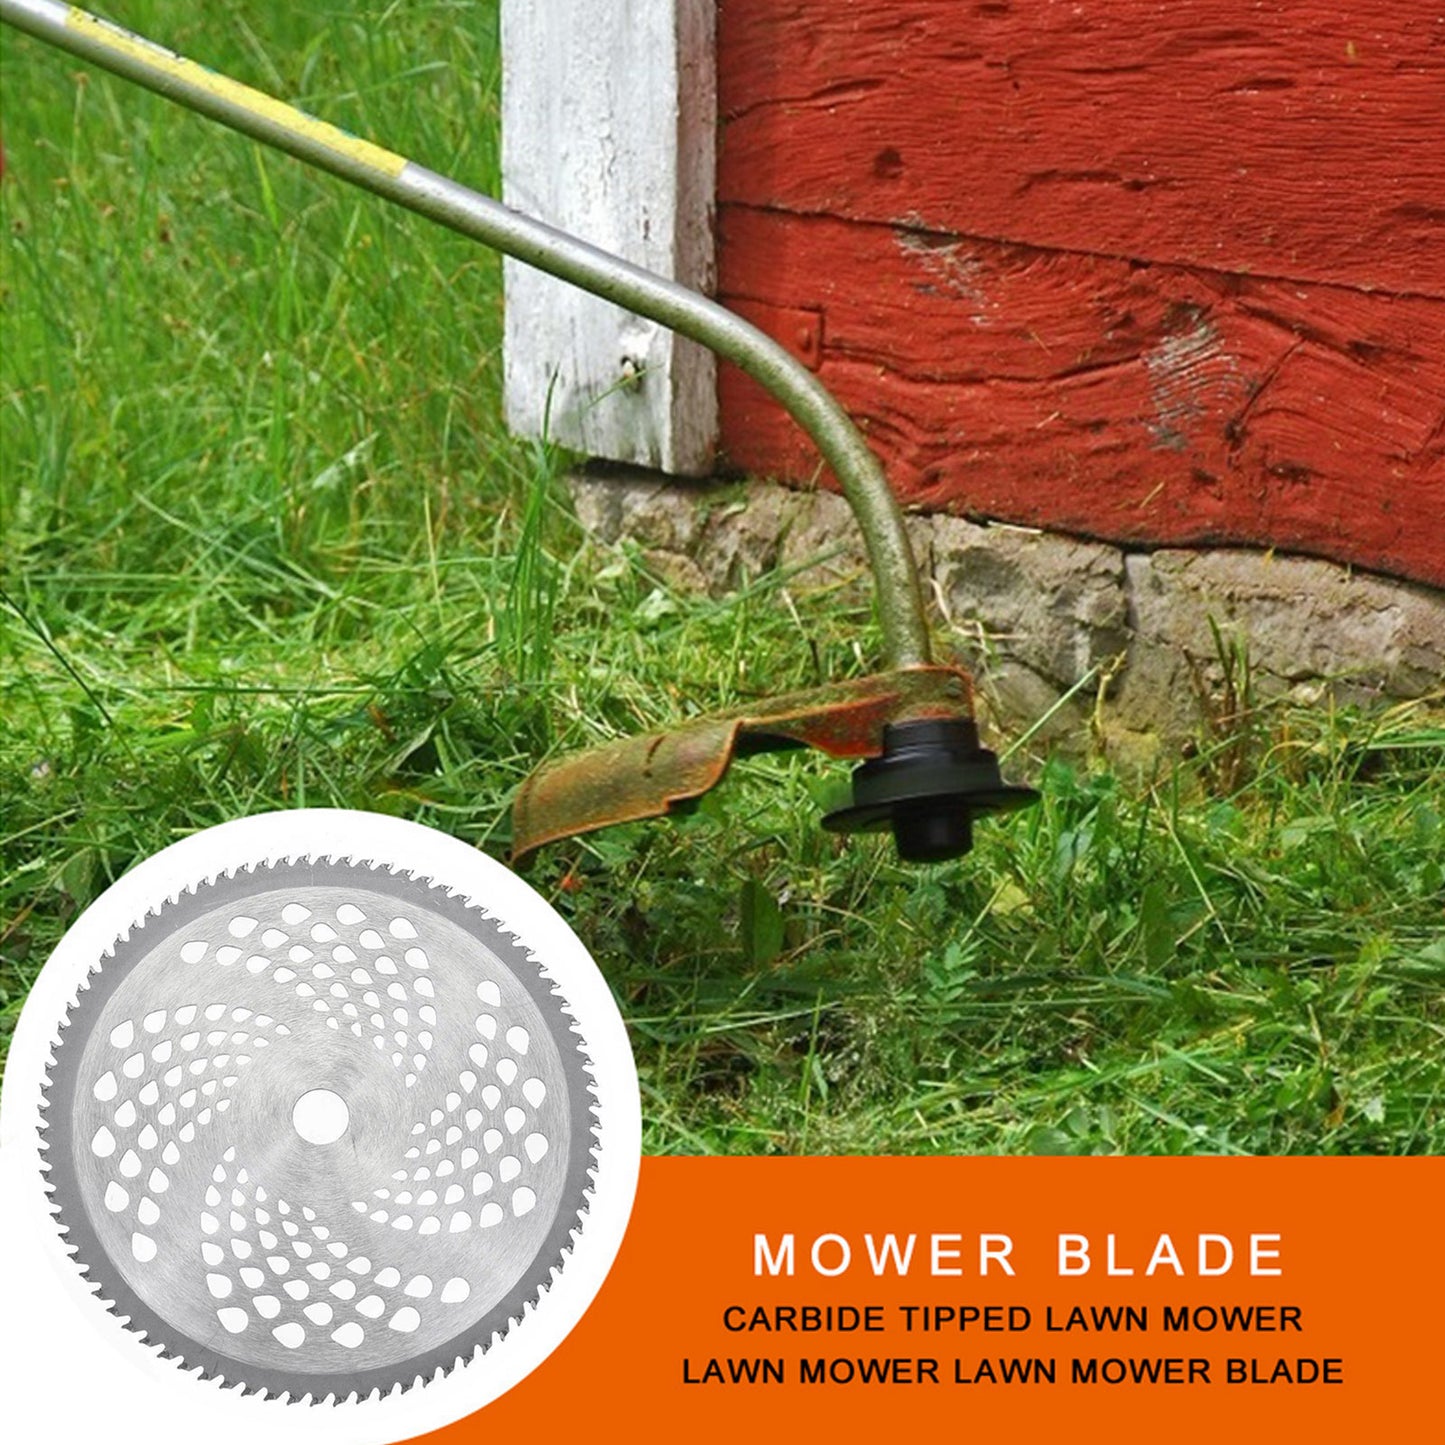 Reliable Cutting Accessory for Lawn Care - High-Quality Circular Saw Blade for Grass Cutting